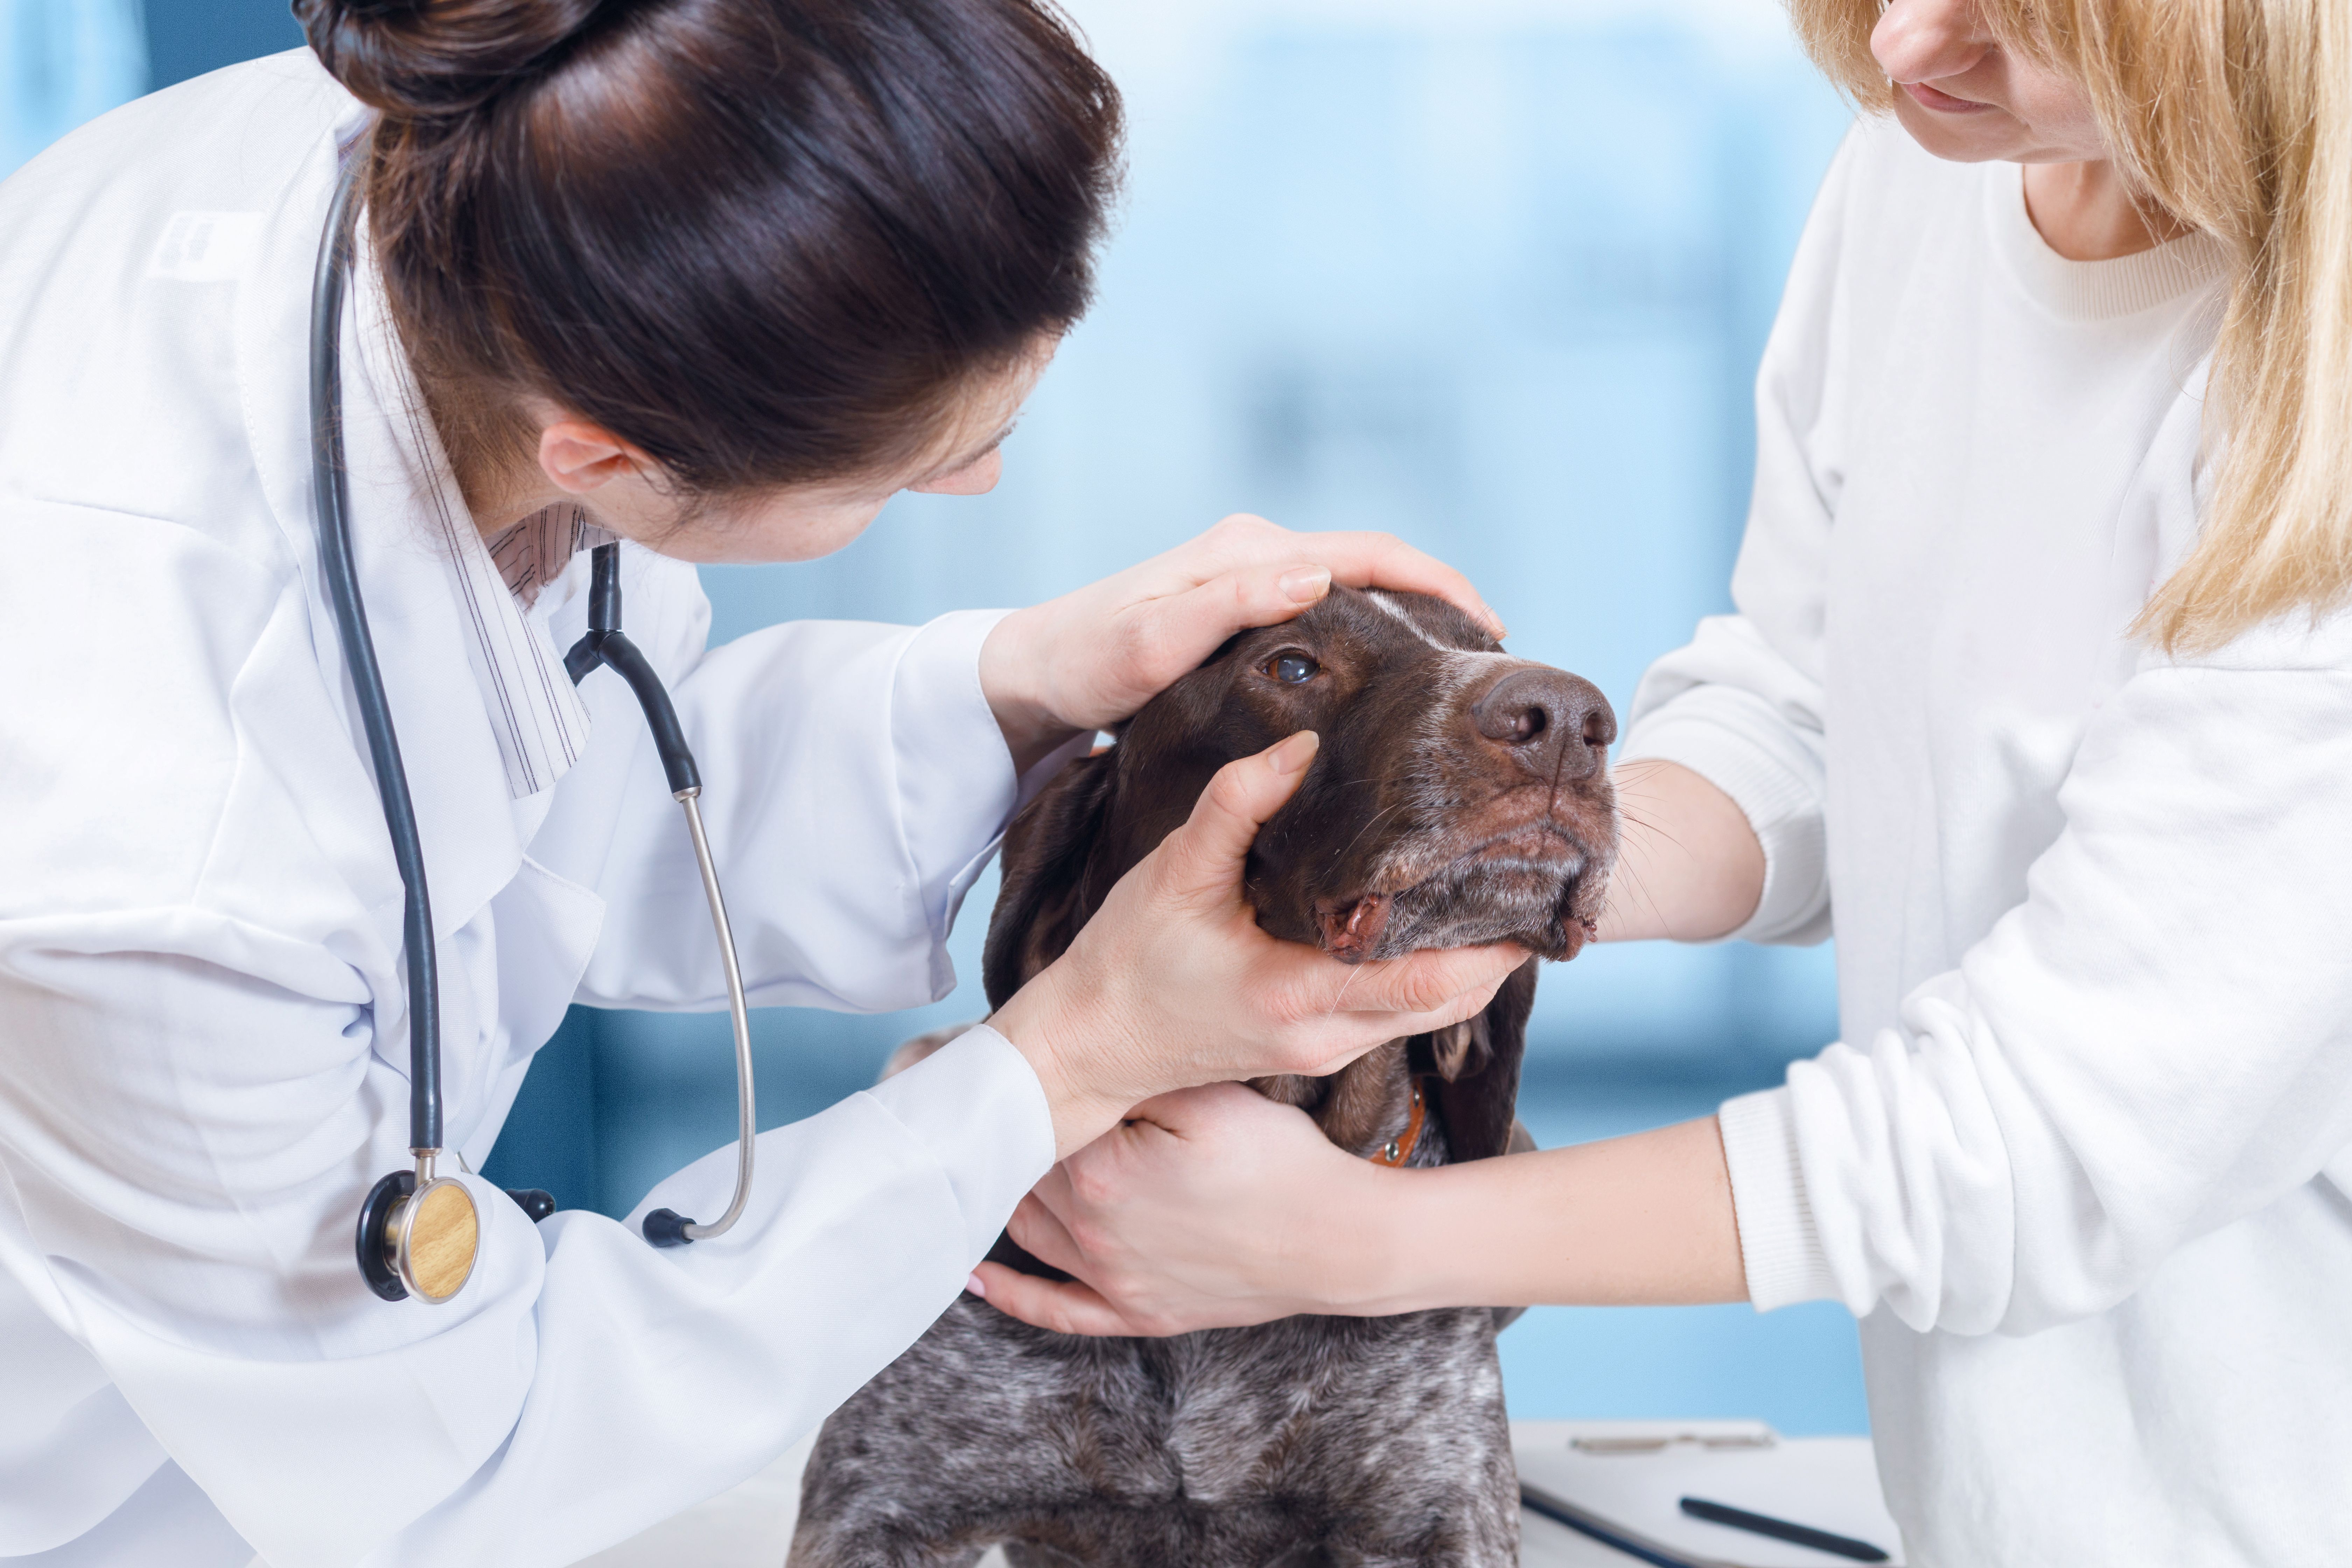 AVMA unveils new “Language of Veterinary Care” online tools and research